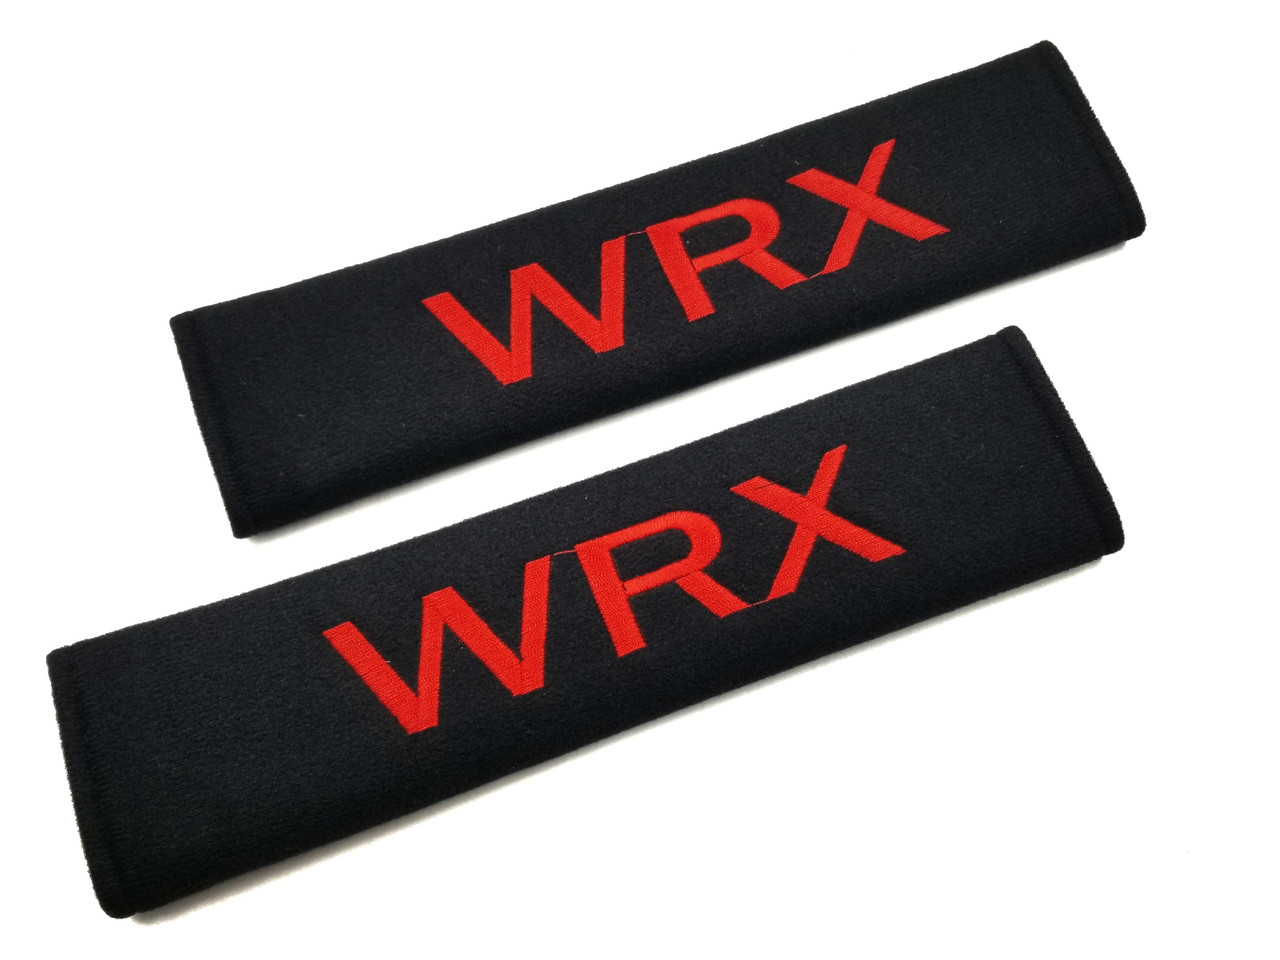 WRX Soft Touch Fabric Seat Belt Shoulder Pads Cover - Black/Red - JDMFV  WRAPS